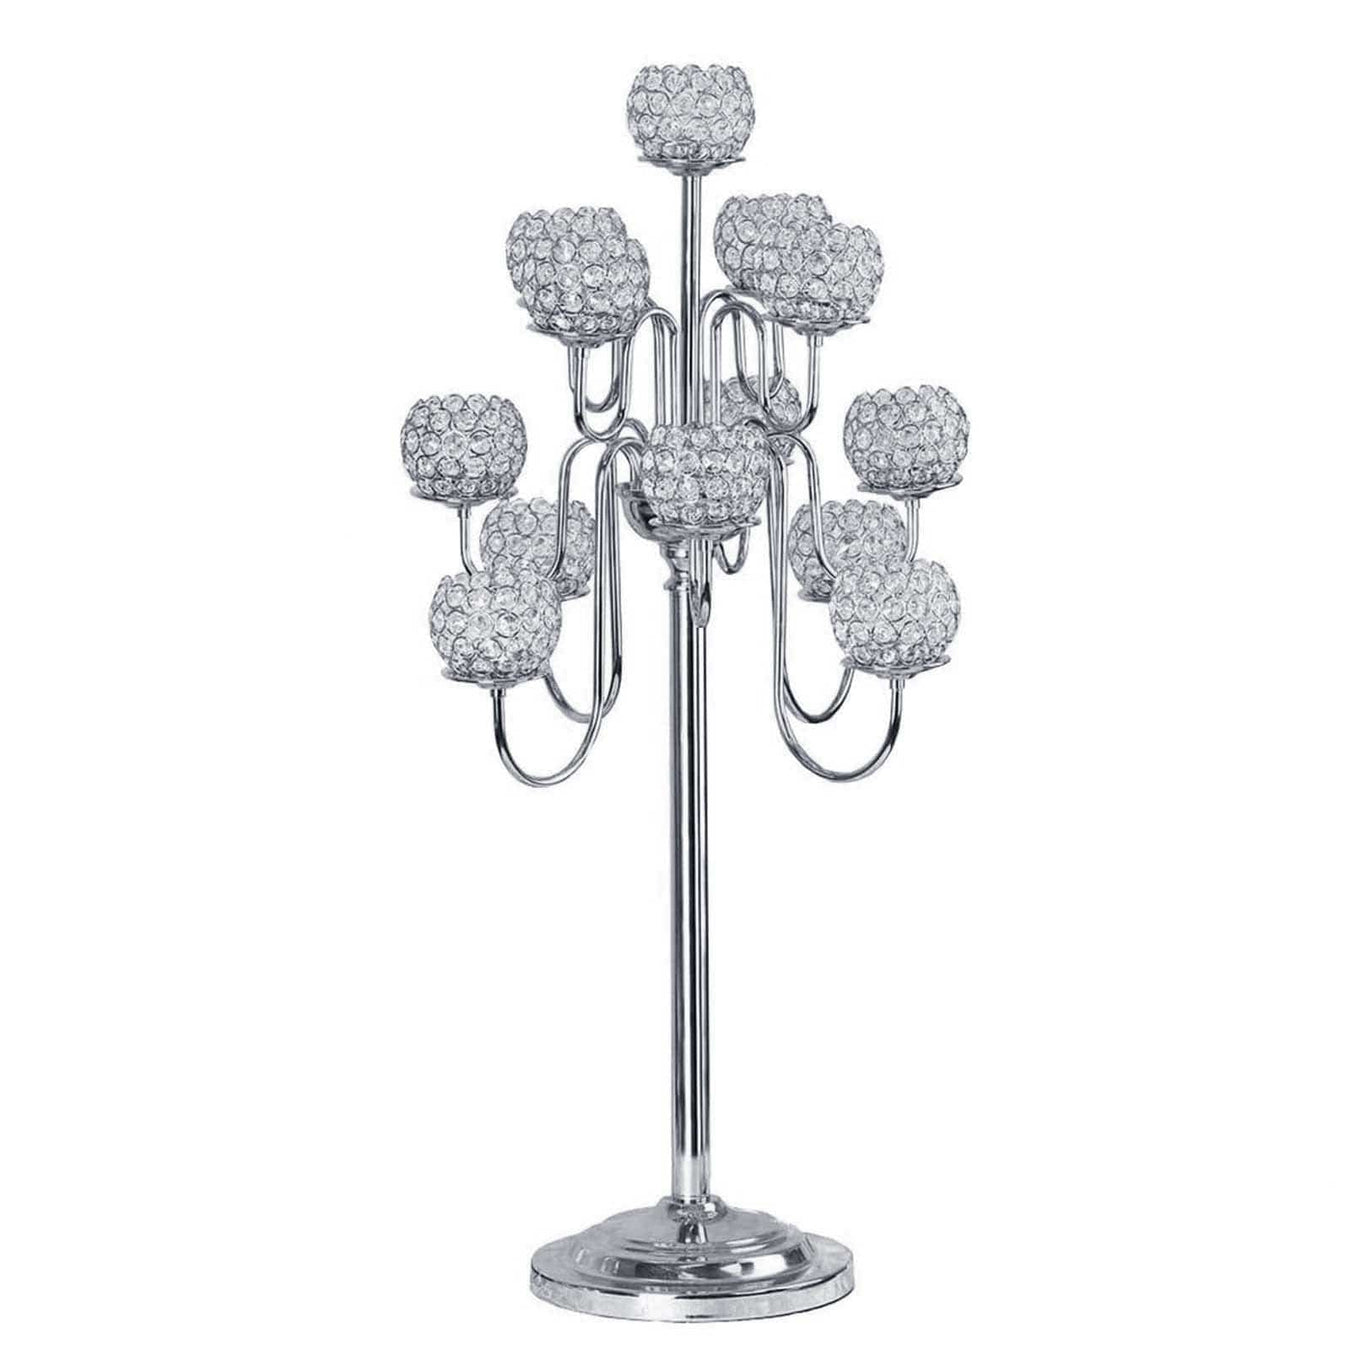 variant-40-inches-crystal-beaded-candelabra-candle-holder